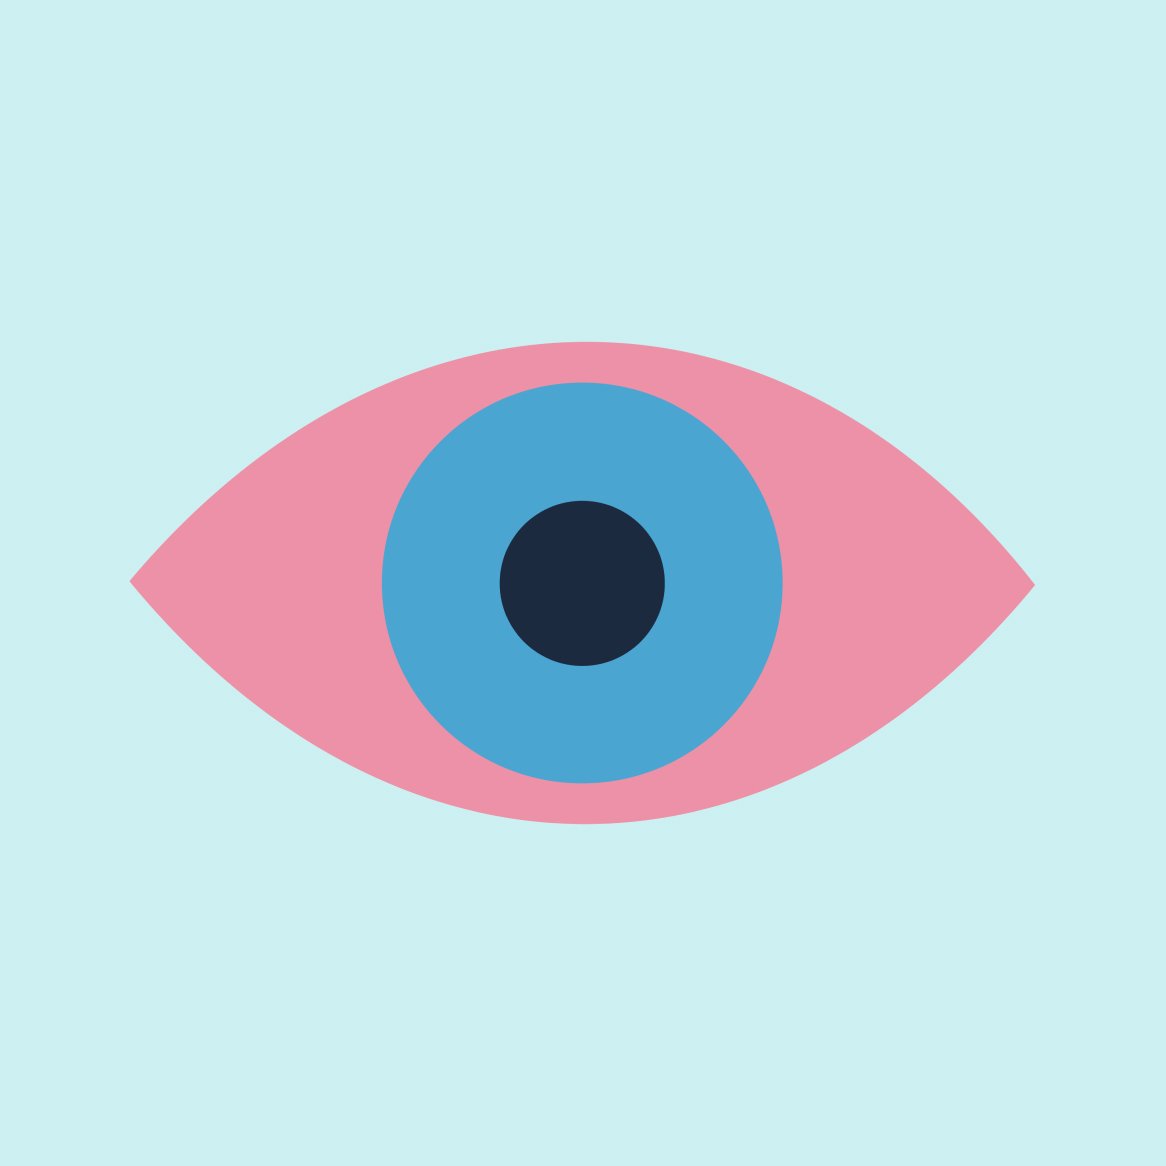 Illustration of an eye with conjunctivitis